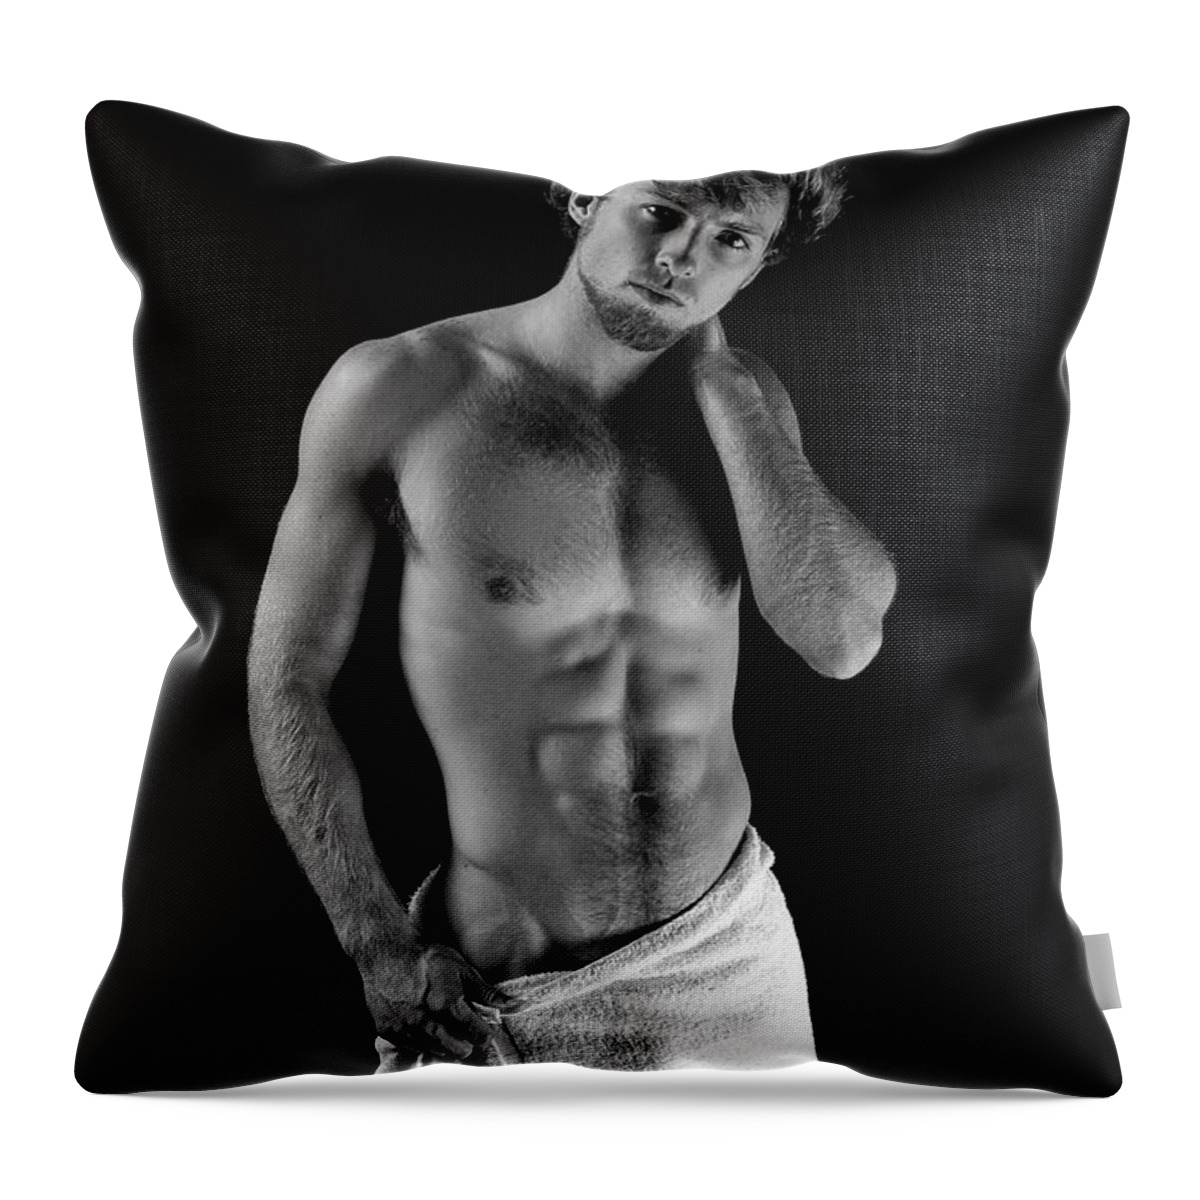 Male Throw Pillow featuring the photograph Jacob by Dan Nelson